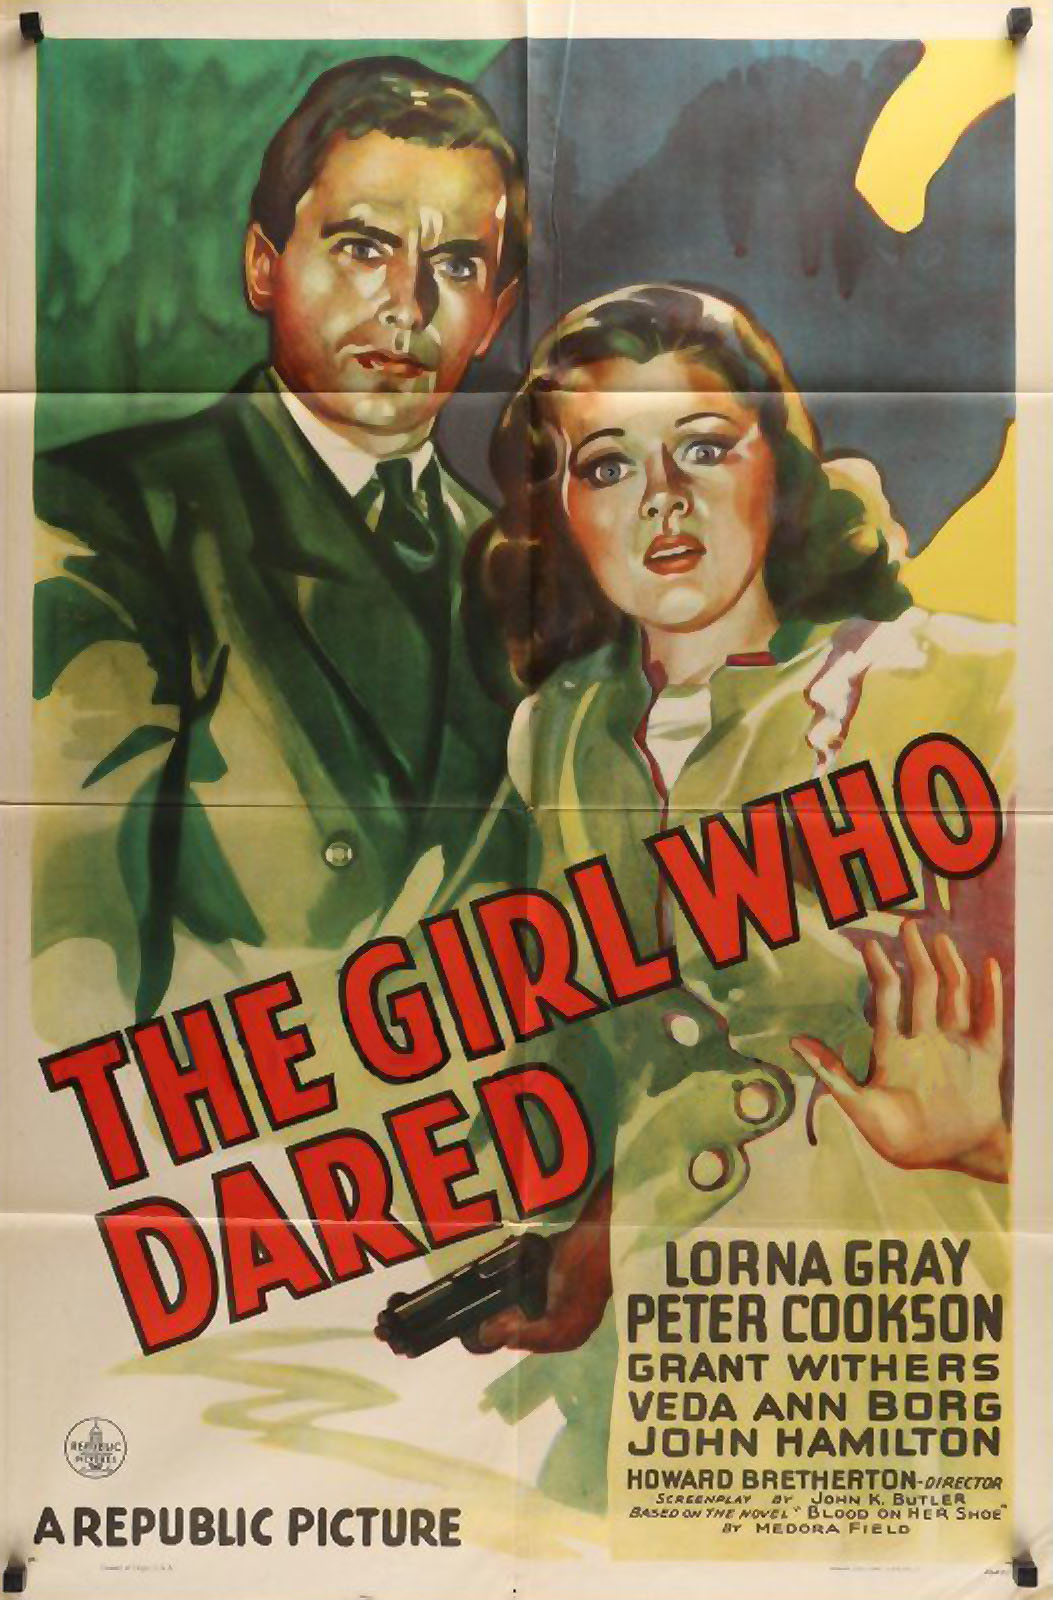 GIRL WHO DARED, THE